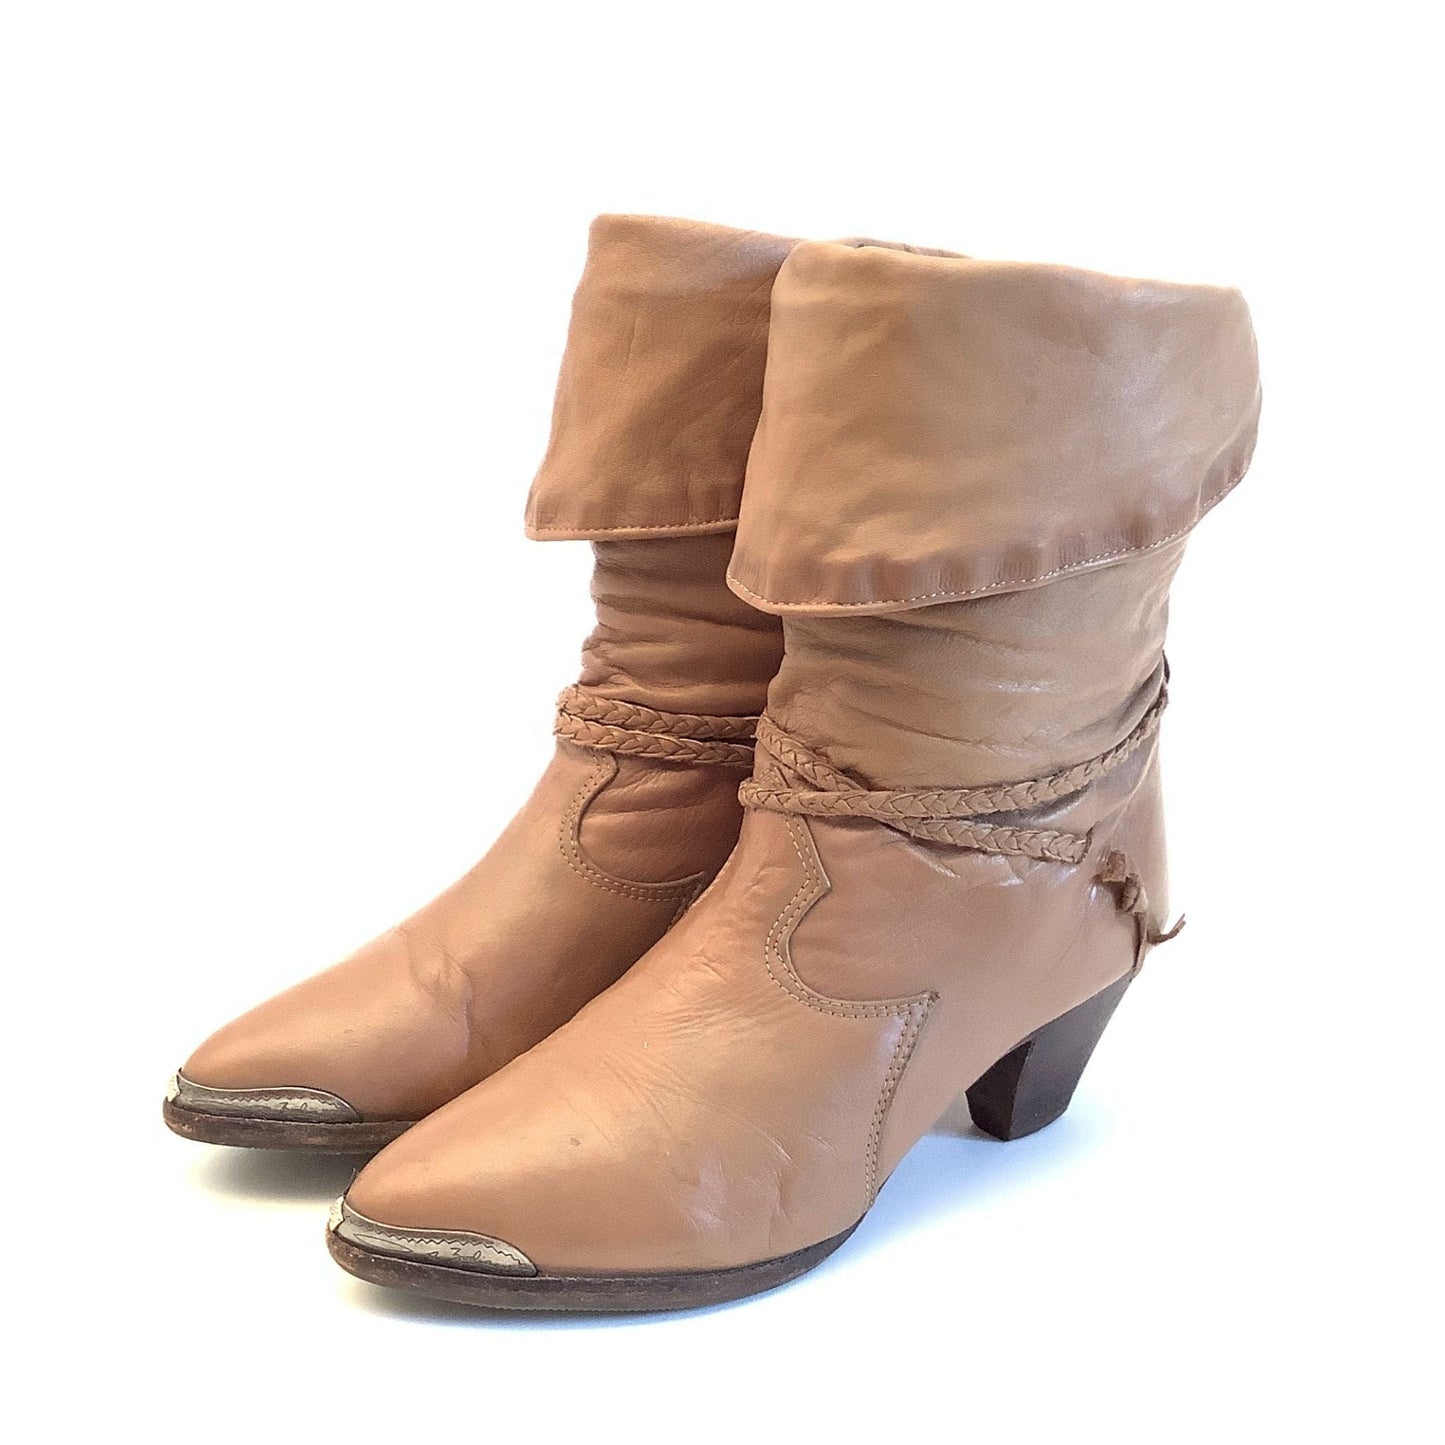 1980s Zodiac Slouch Boots 7 / Taupe / Vintage 1980s